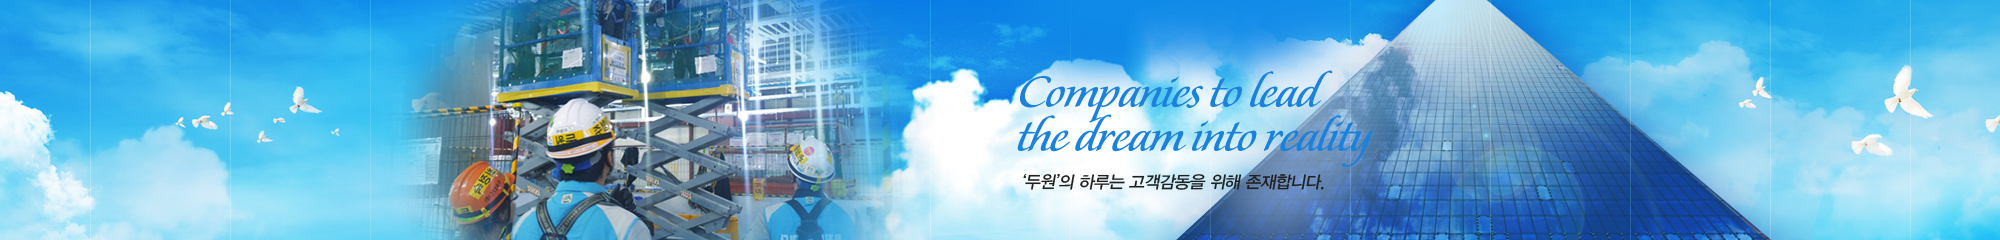 Companies to lead the dream into reality ‘두원’의 하루는 고객감동을 위해 존재합니다.